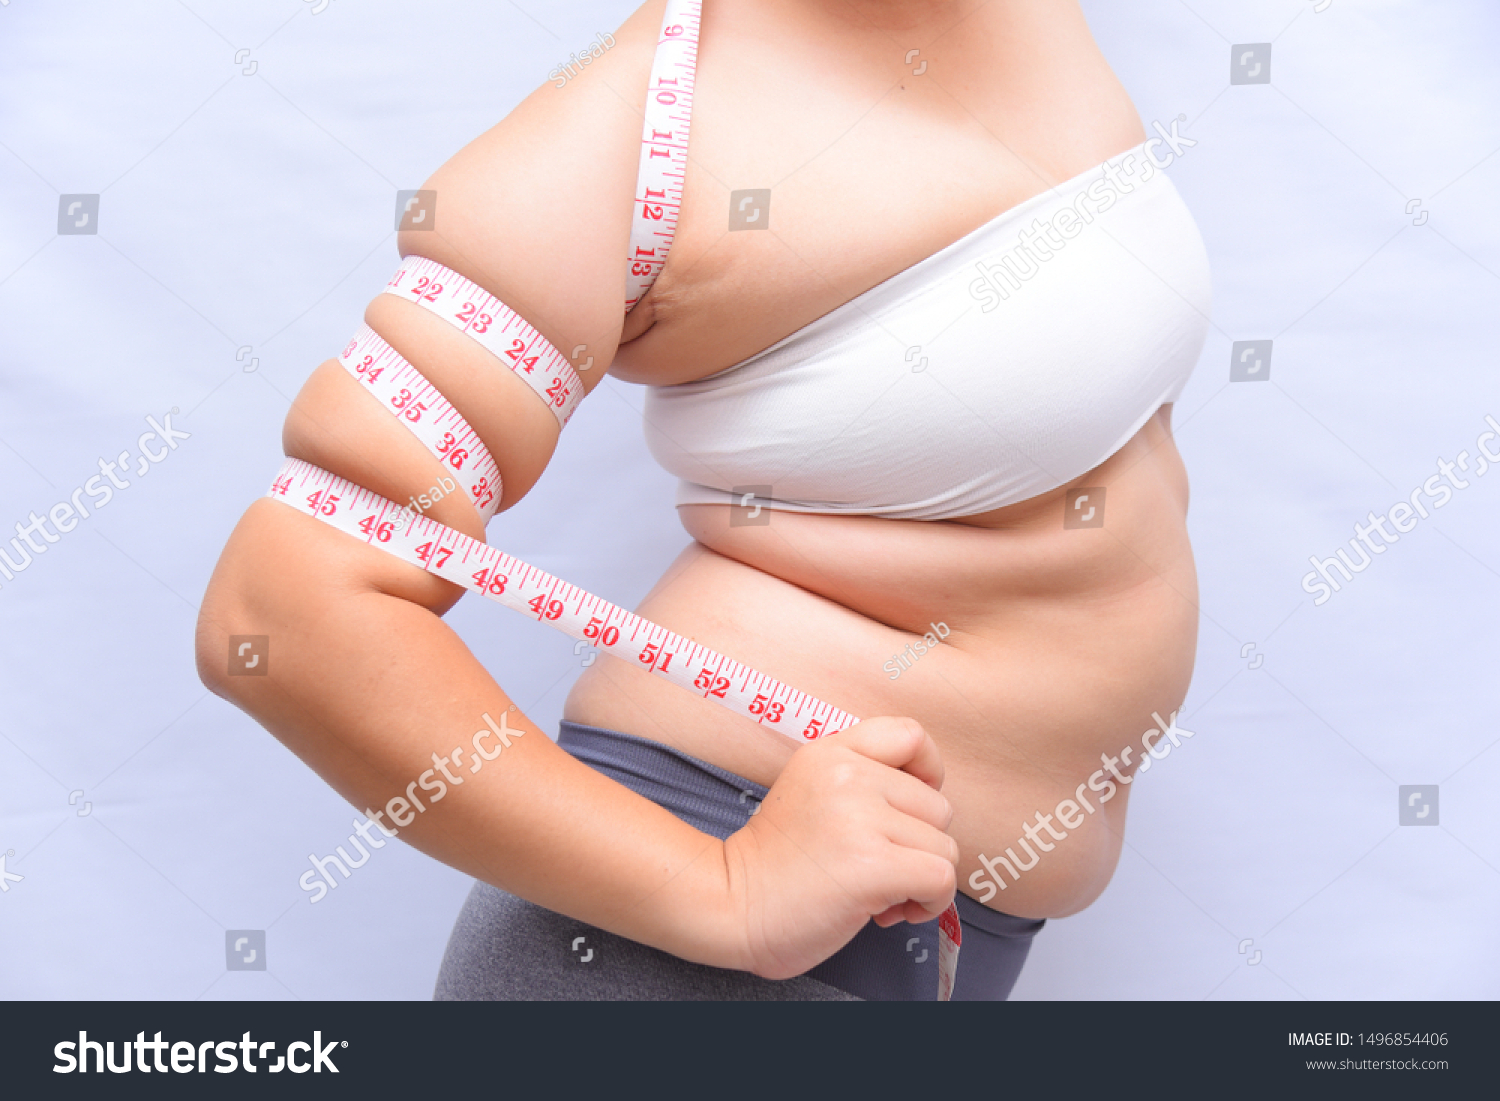 Beautiful fat woman She uses a tape measure to measure her arms on a white background. She wants to lose weight the concept of surgery and break down the fat underneath. #1496854406